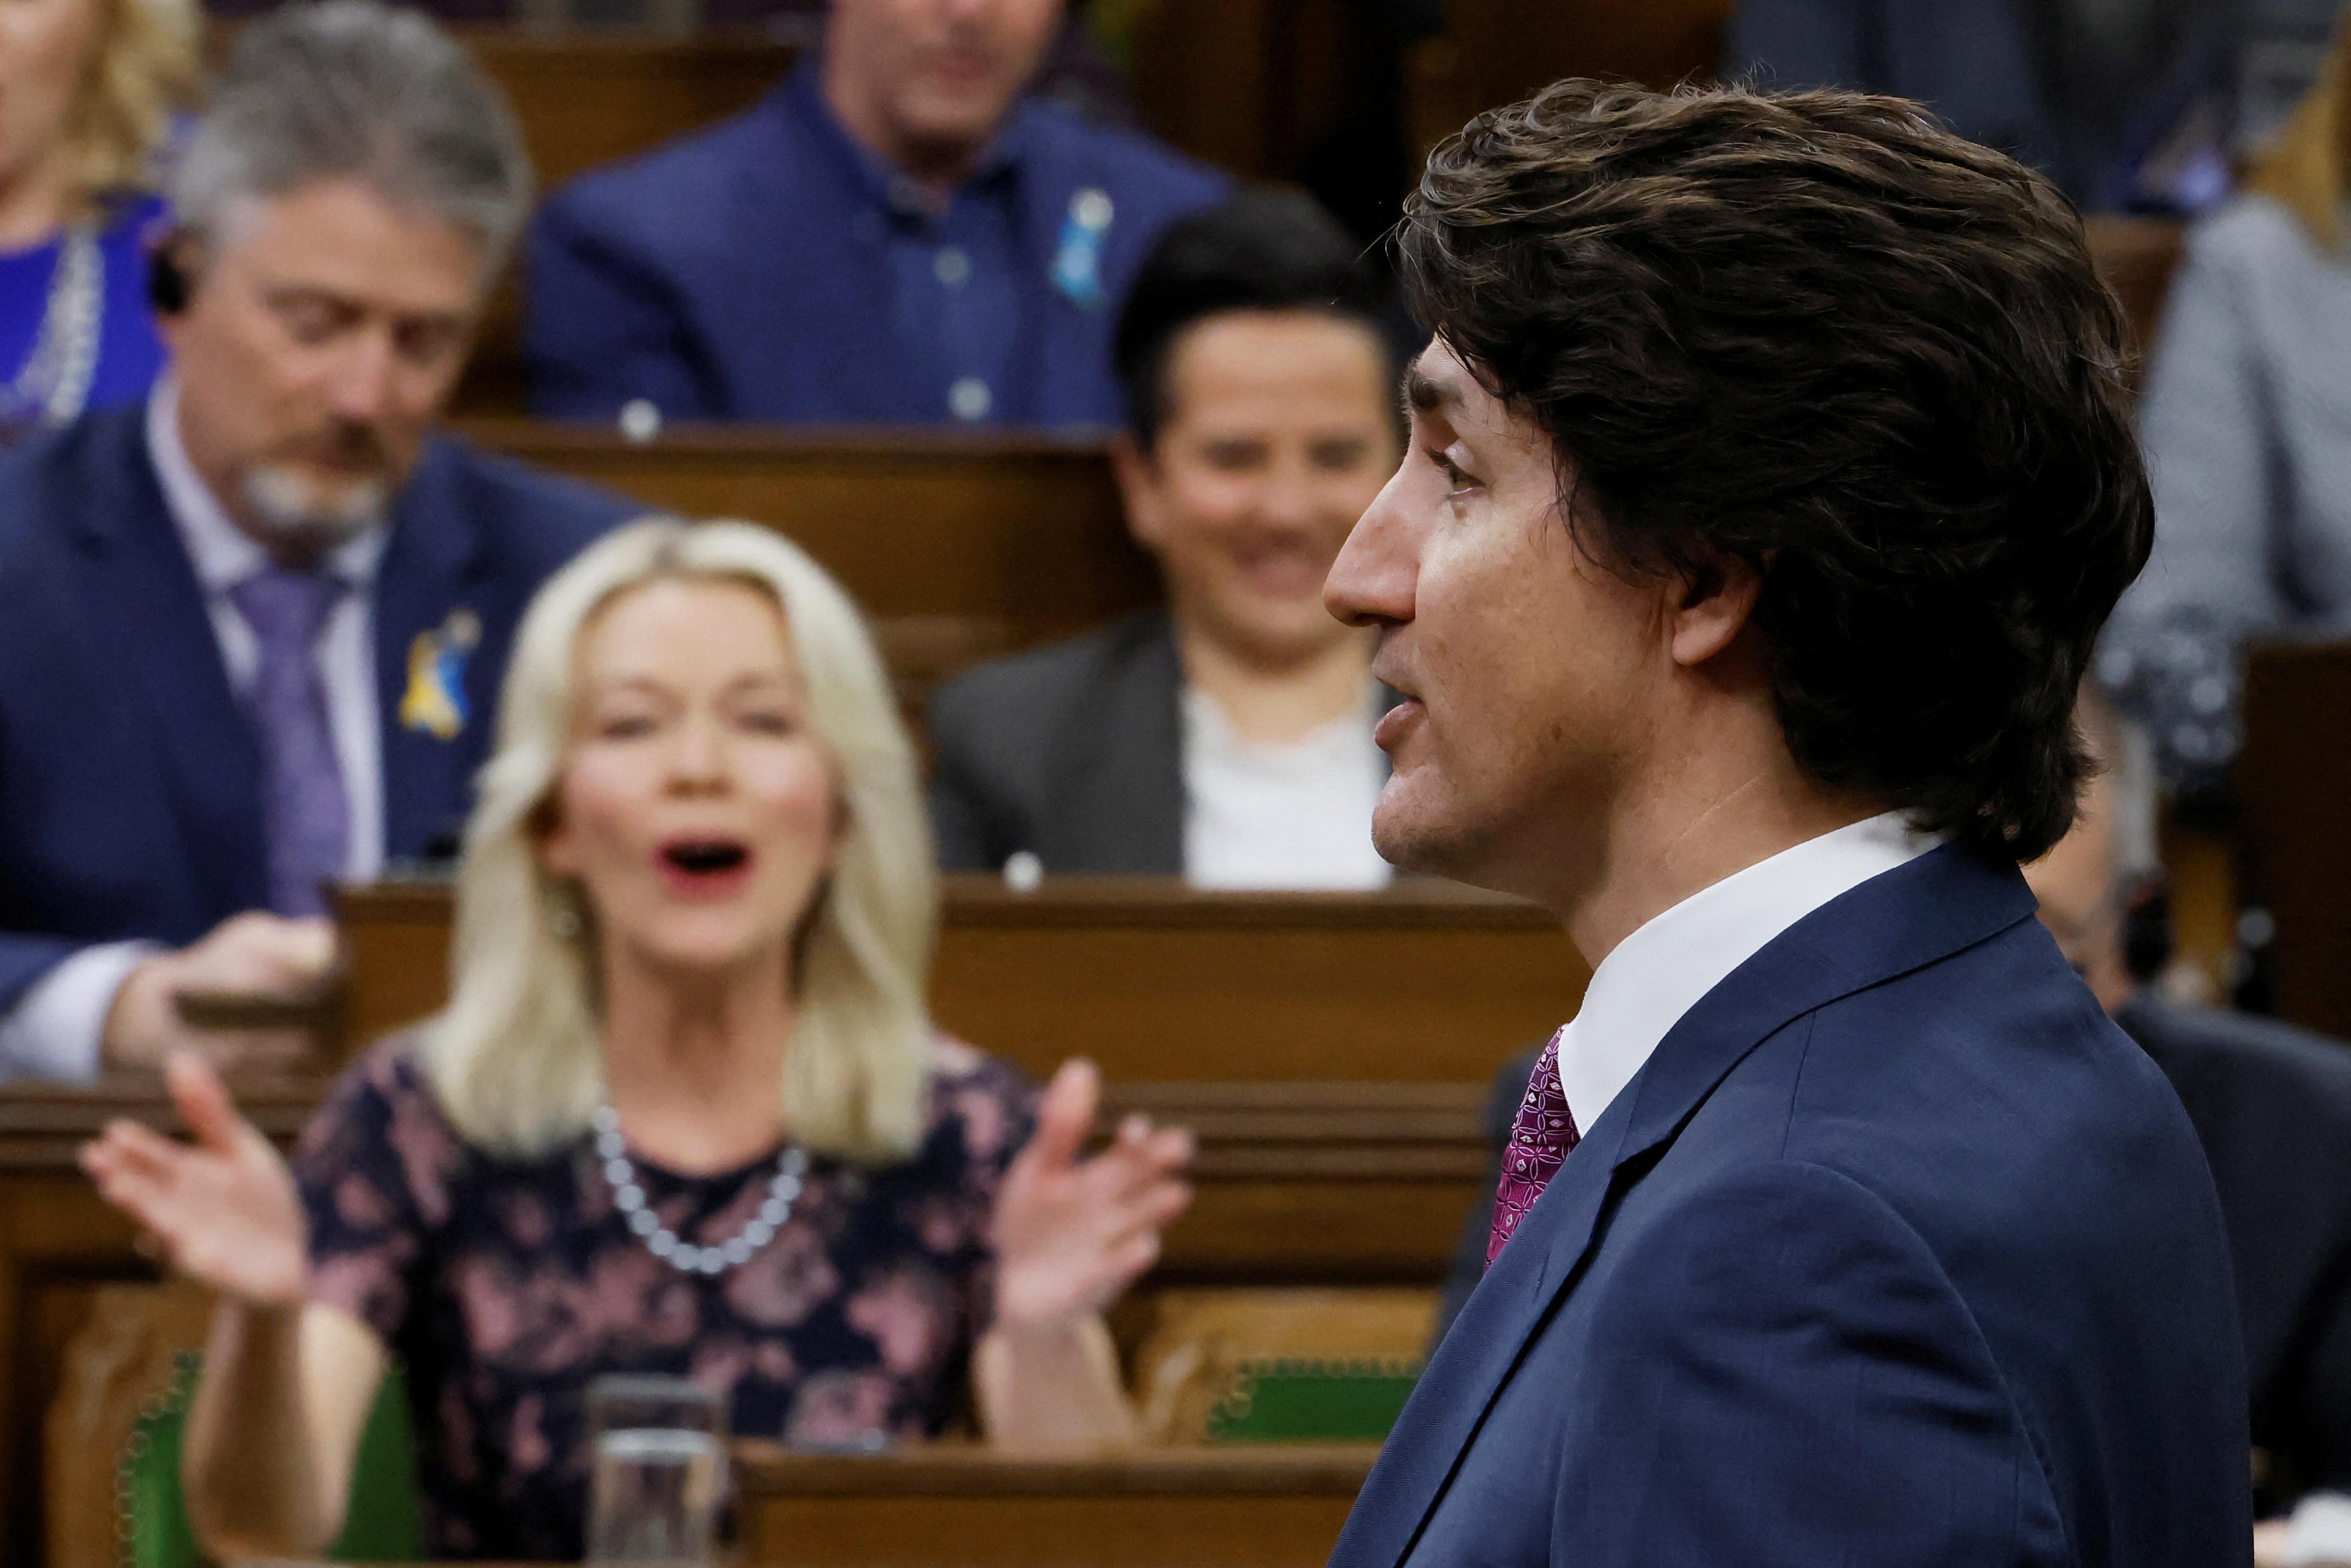 Canada's Prime Minister Justin Trudeau speaks during Question Period in the House of Commons on Parliament Hill in Ottawa